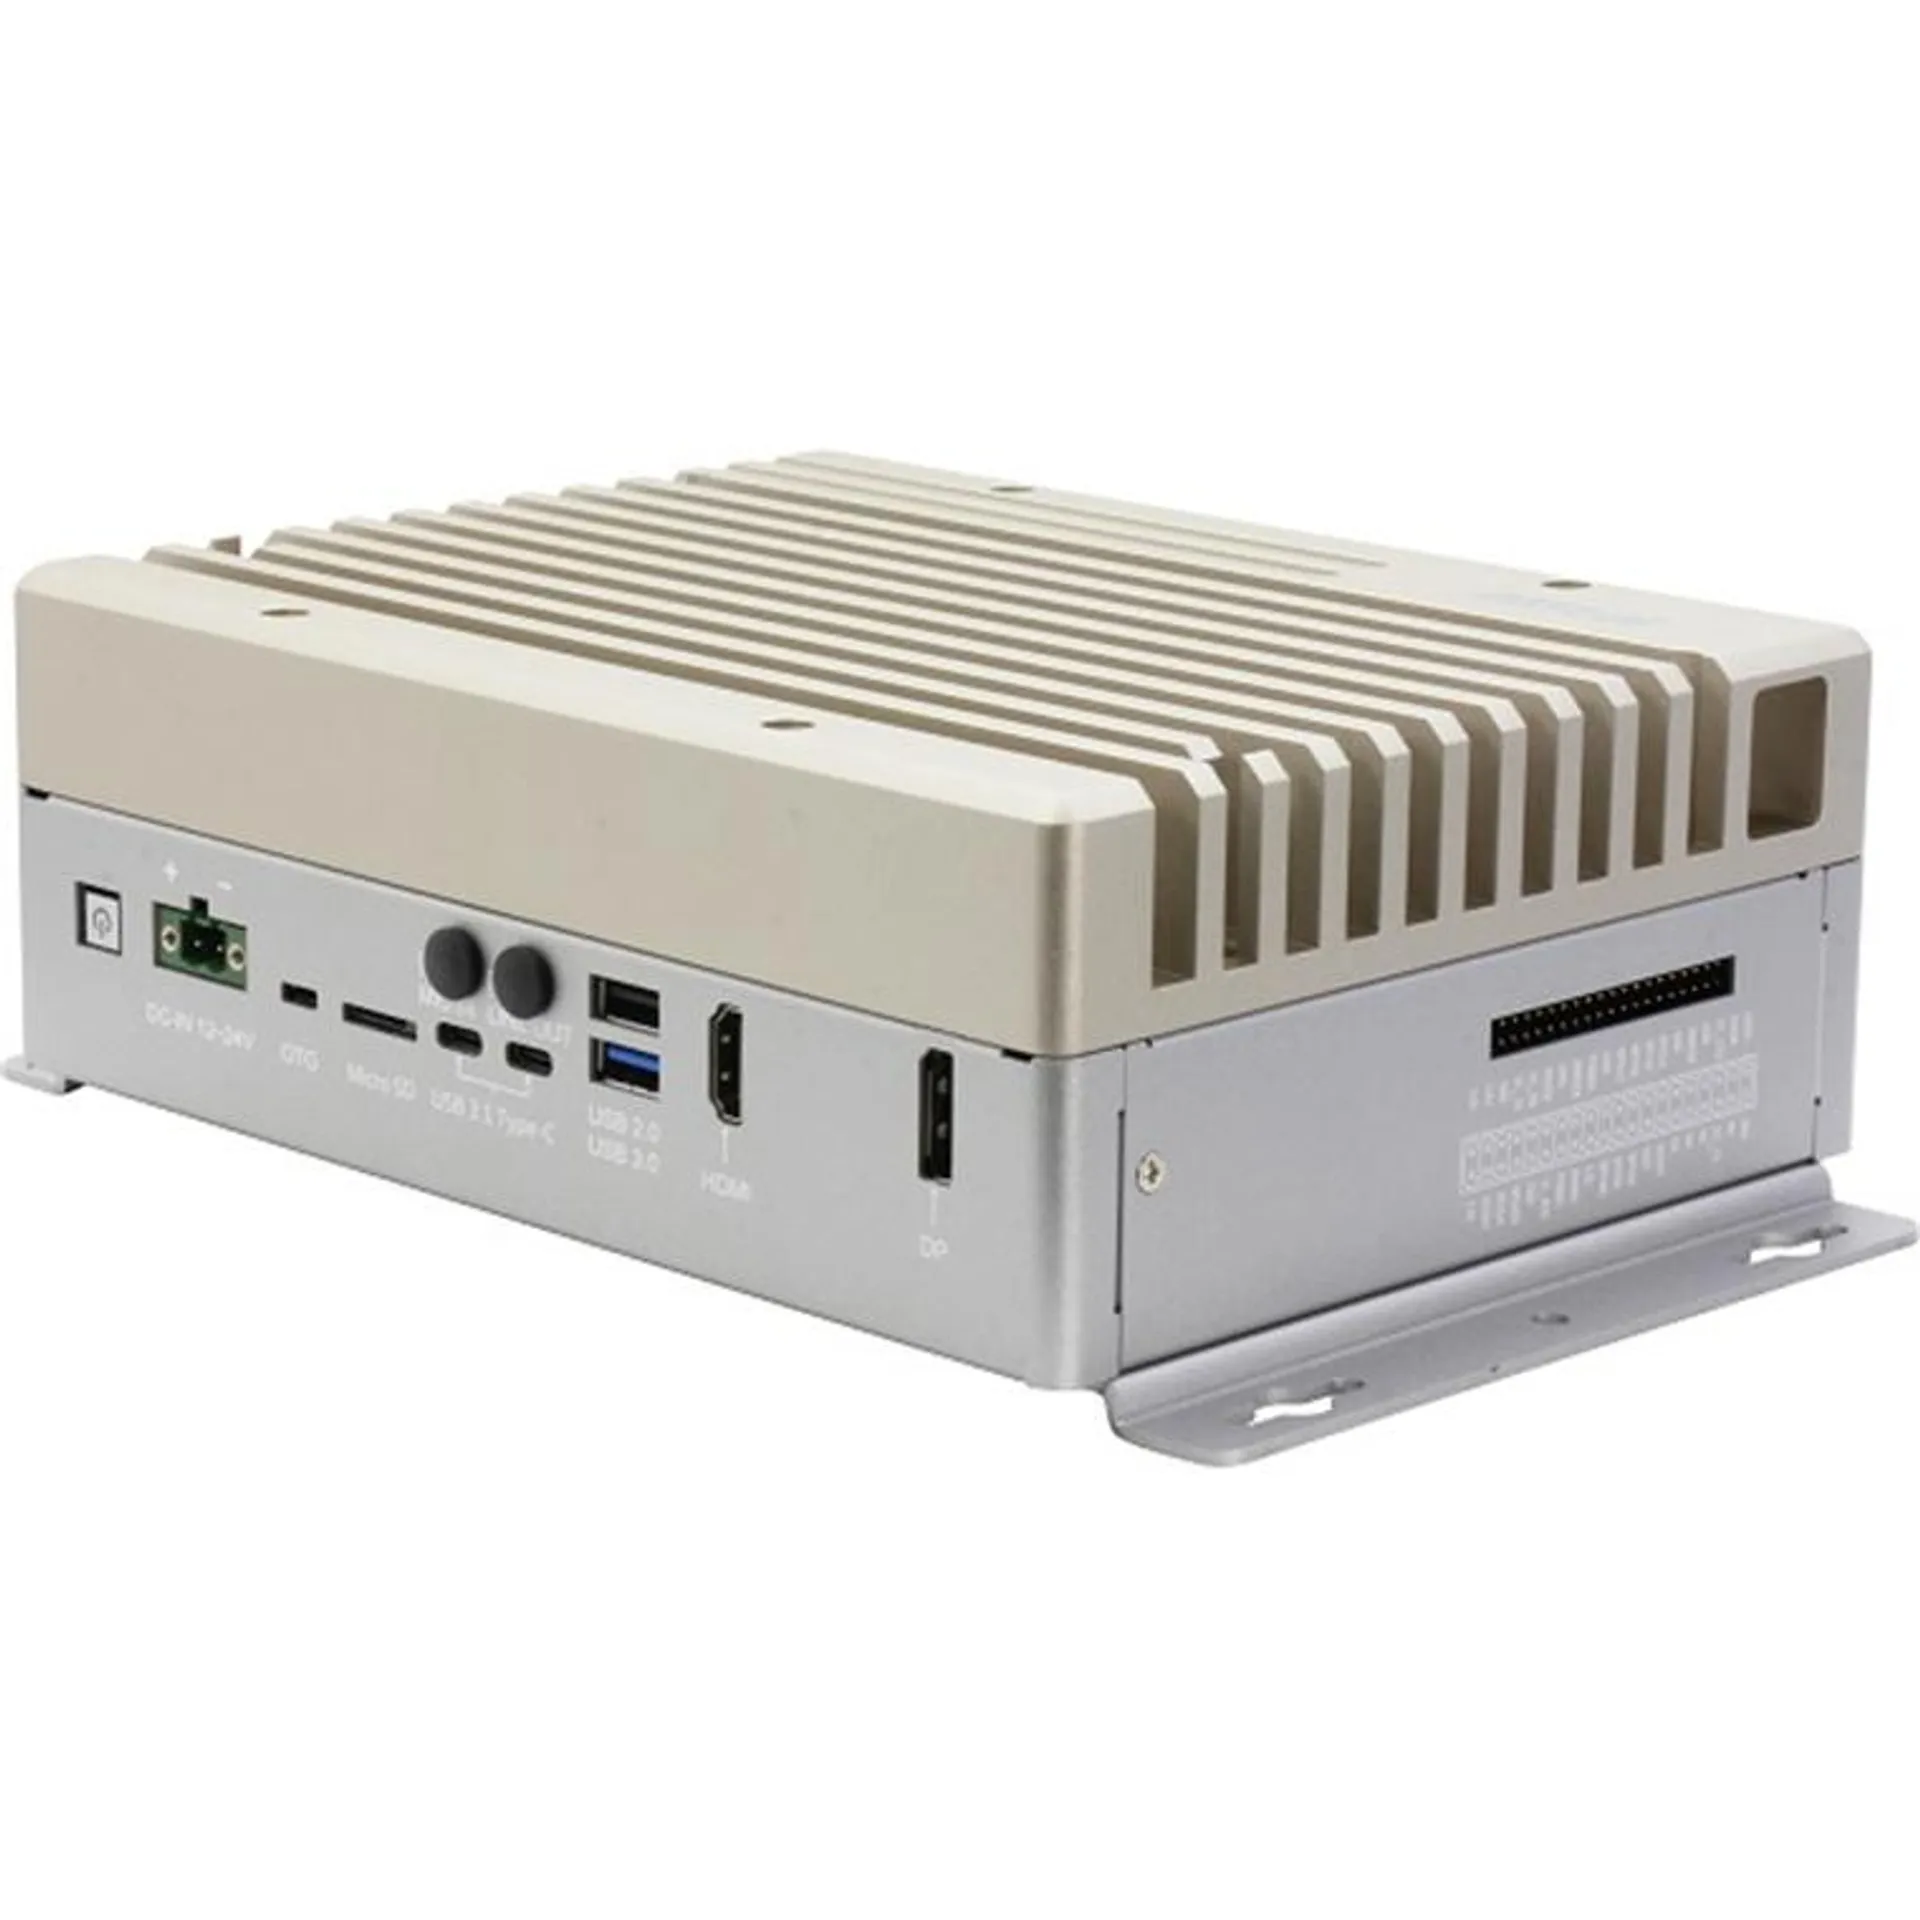 AAEON Embedded BOX PCs BOXER-8640AI NVIDIA Jetson AGX Orin 32GB 1792-core Amper GPU with Tensor cores, 4xRJ-45 for PoE, 1x DB-9 for RS-232/422/485, 1x CANBUS, 40-pin header, M.2 E key, M key and SATA storage with Power adapter without NZ p